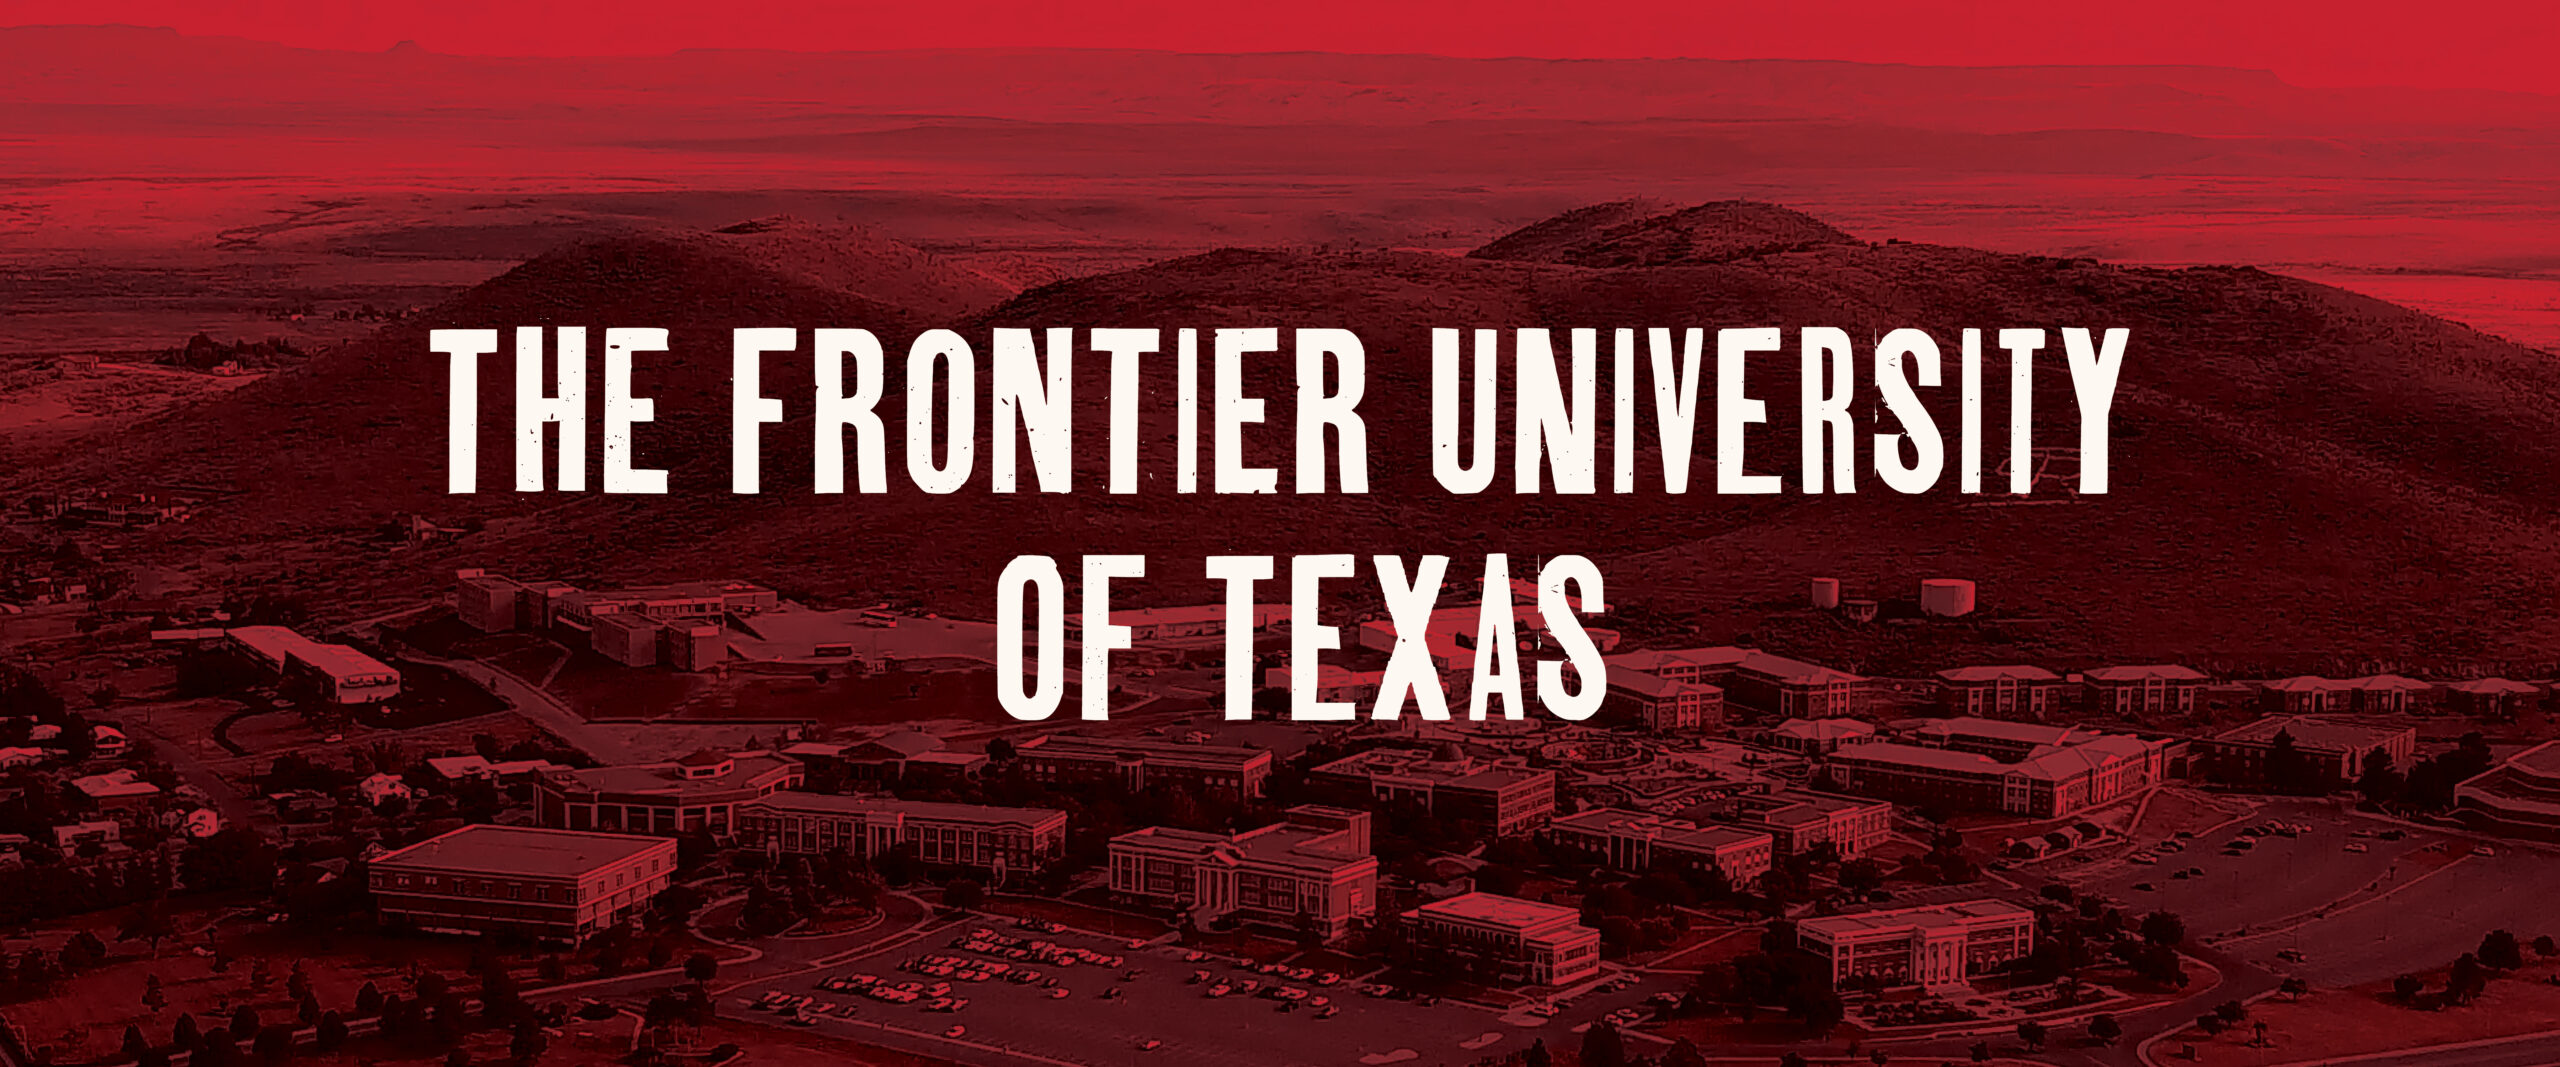 SUL ROSS - THE FRONTIER UNIVERSITY of Texas